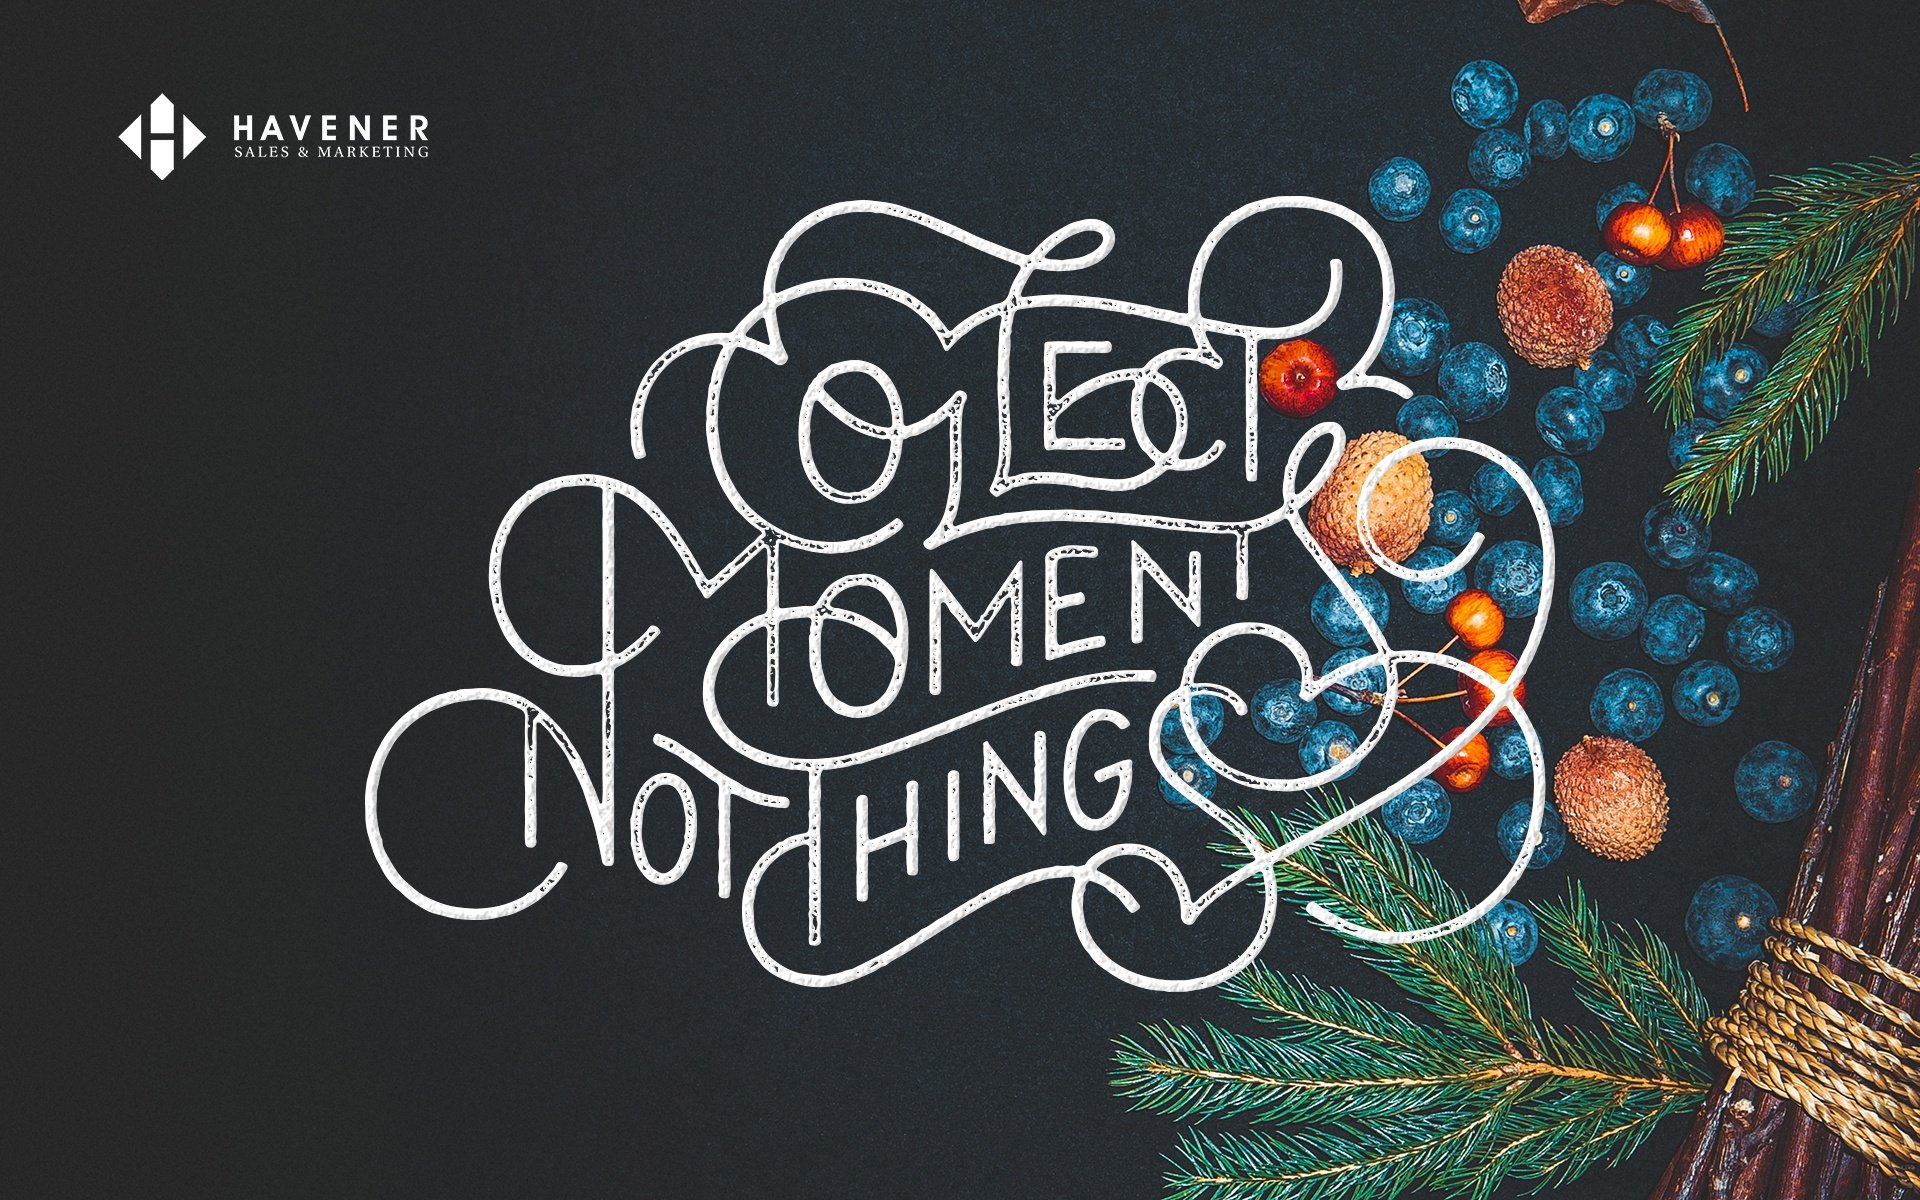 December’s Desktop Wallpaper + Why Moments > Things